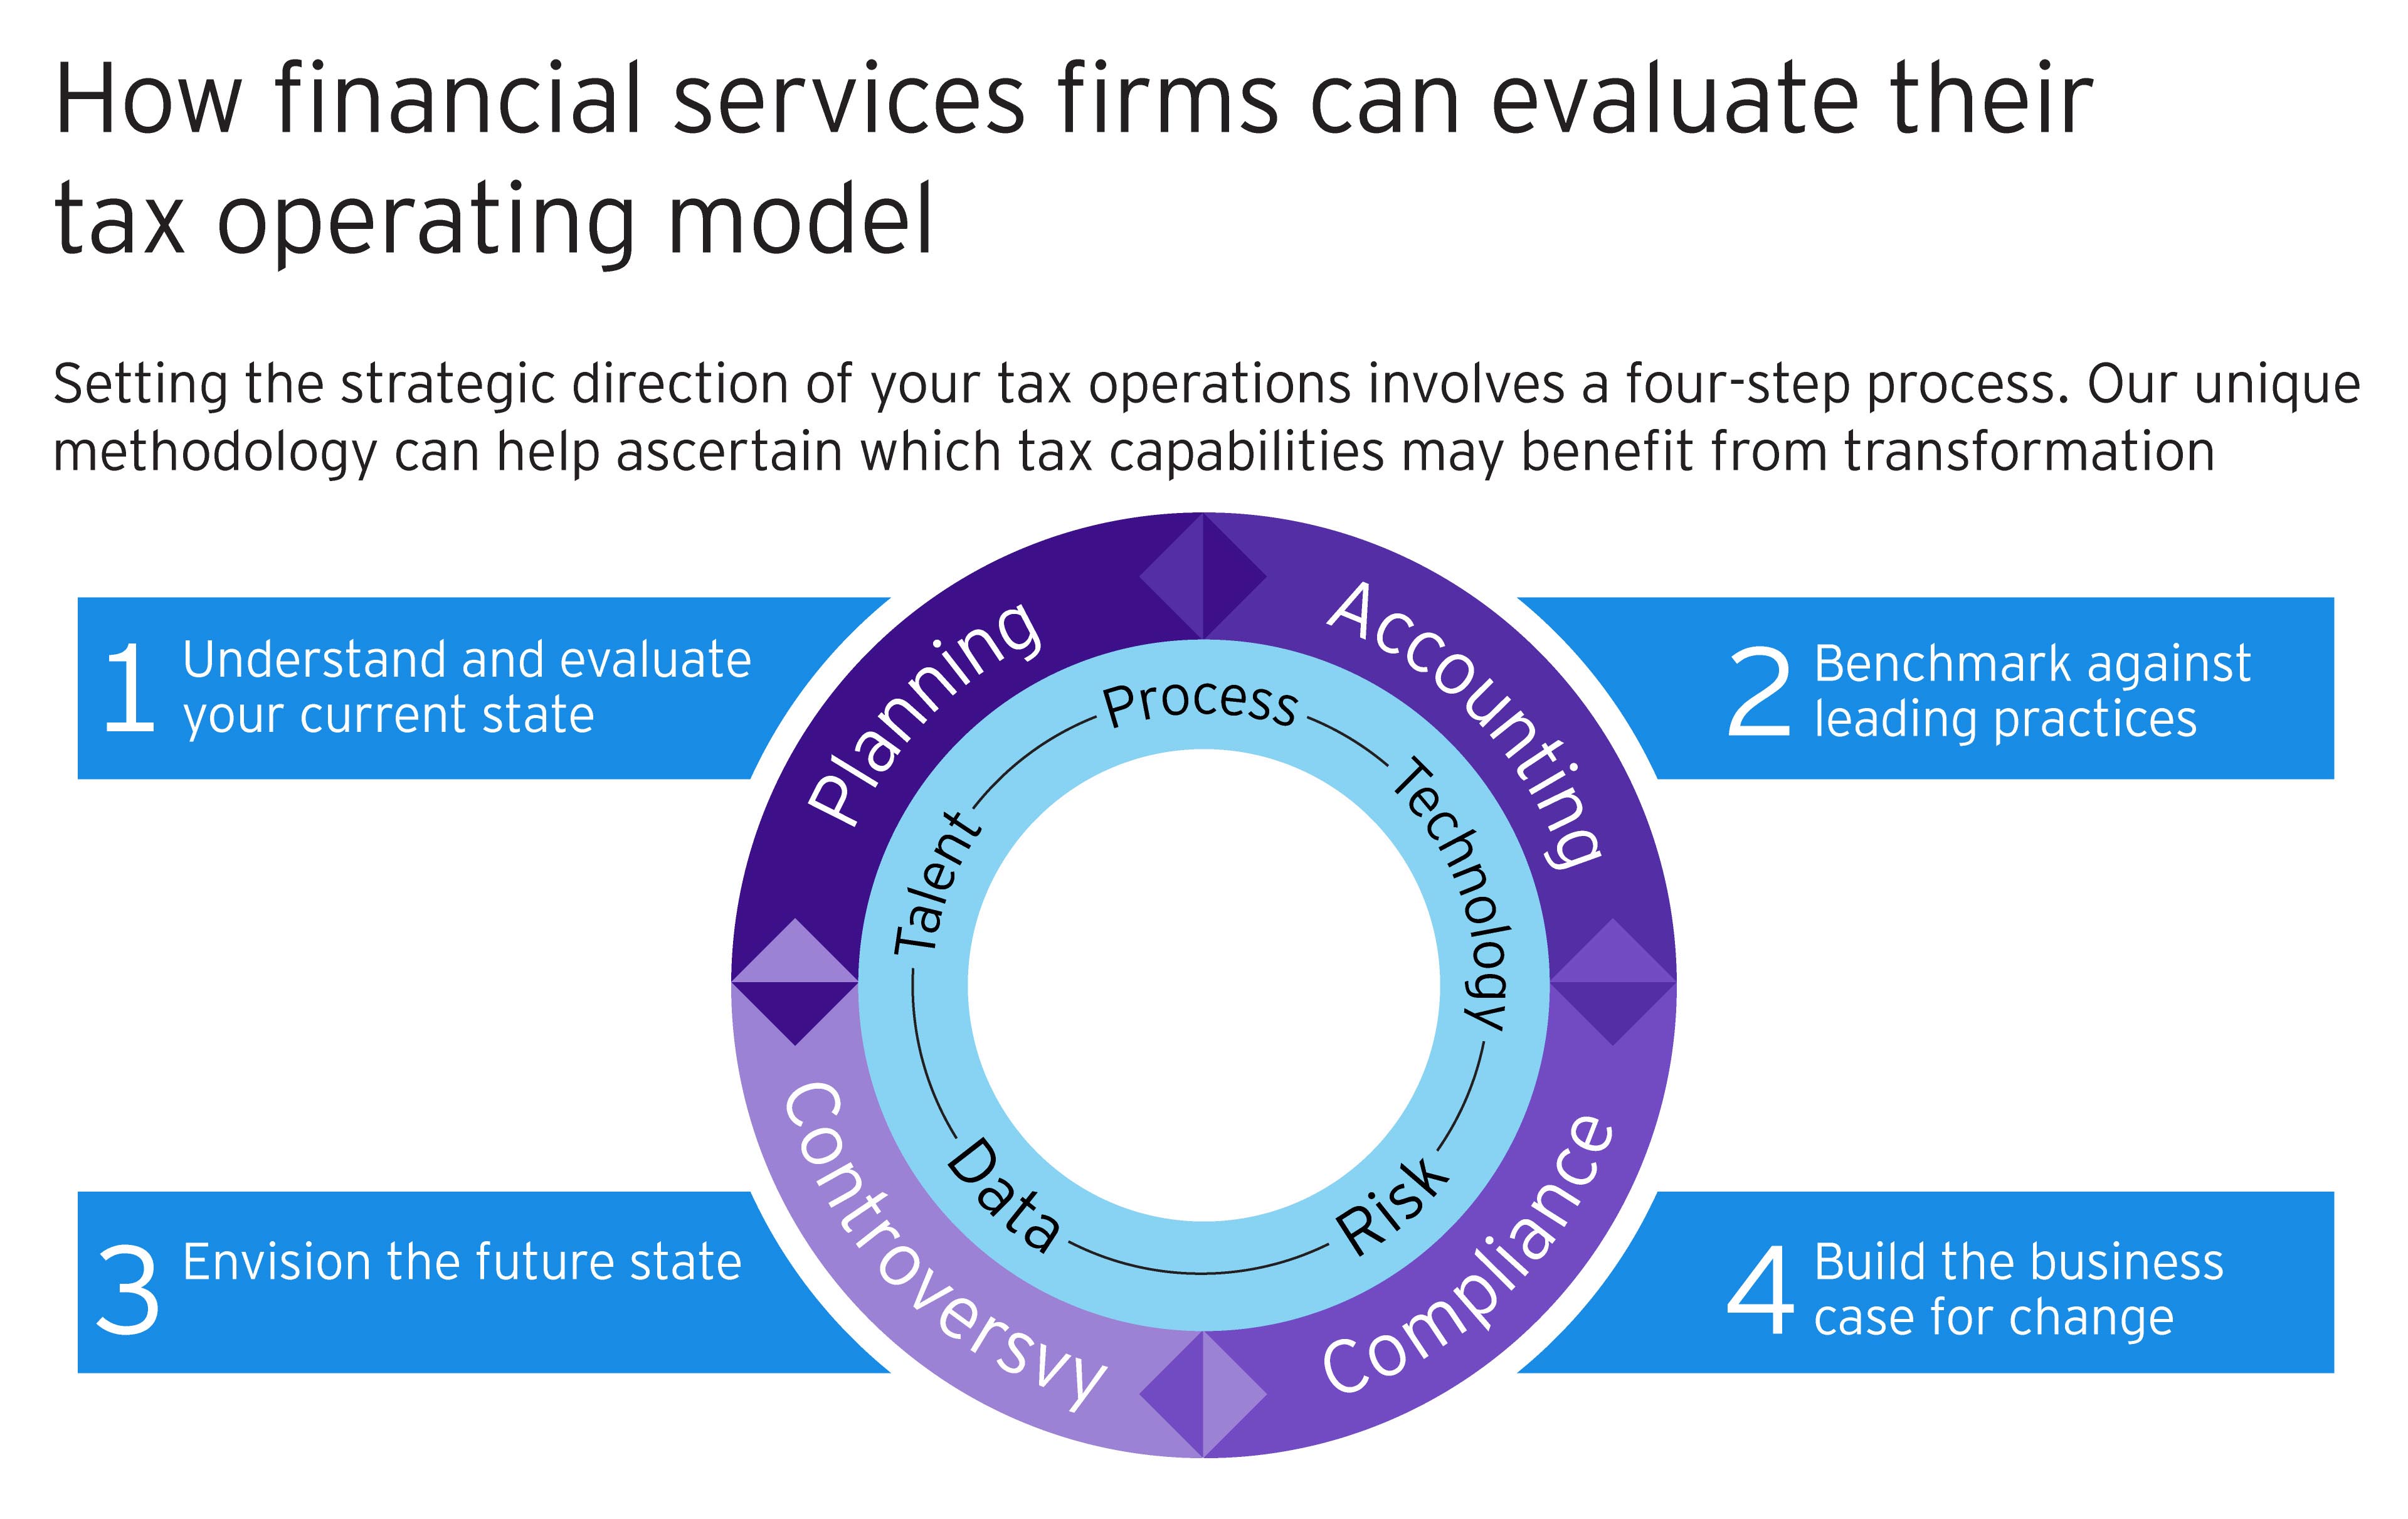 How financial services firms can evaluate tax operating model